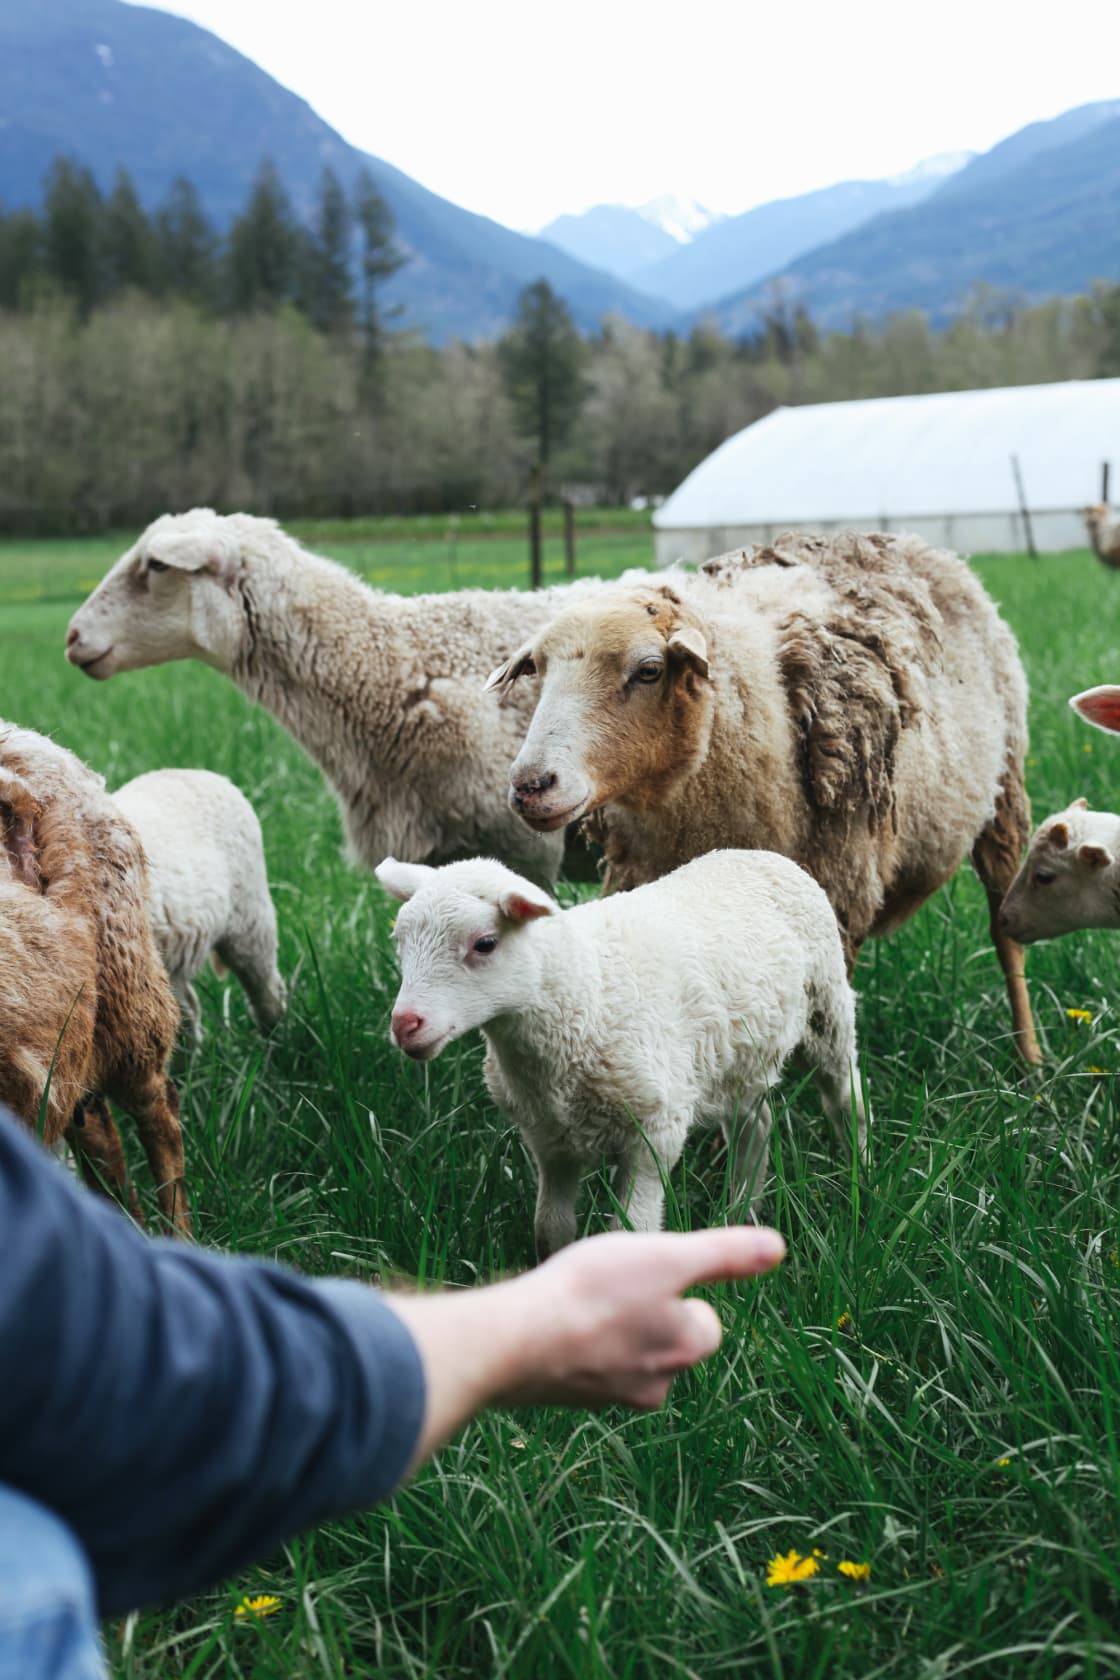 A few of the sheep were timid, but most will come right up to you as long as you have food in hand!